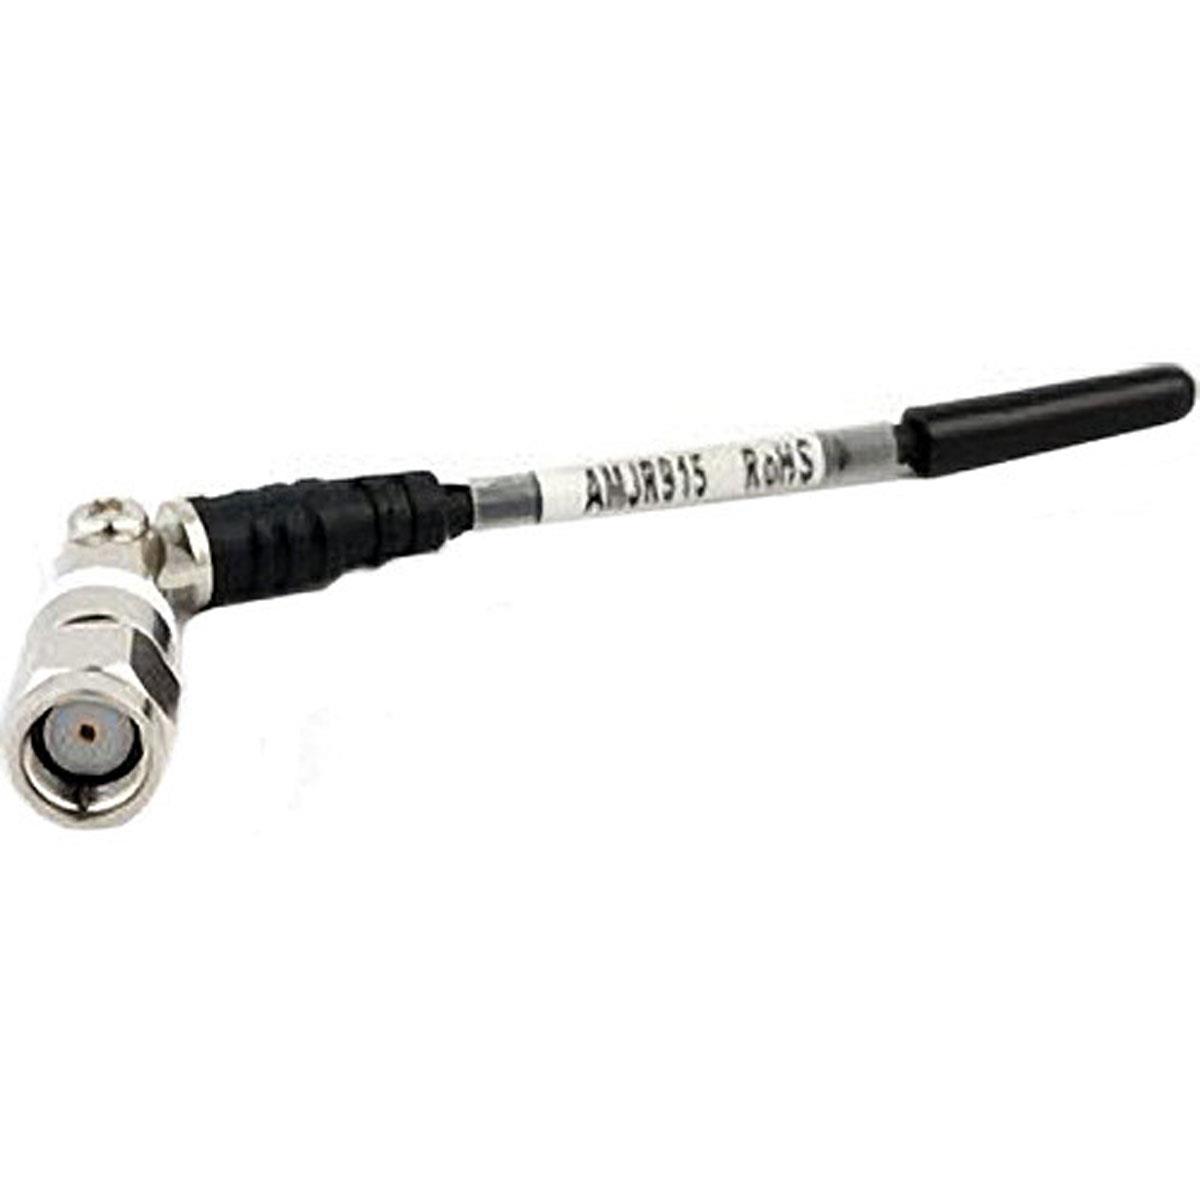 Image of Lectrosonics AMJR915 Whip Antenna with Reverse Gender SMA Connector